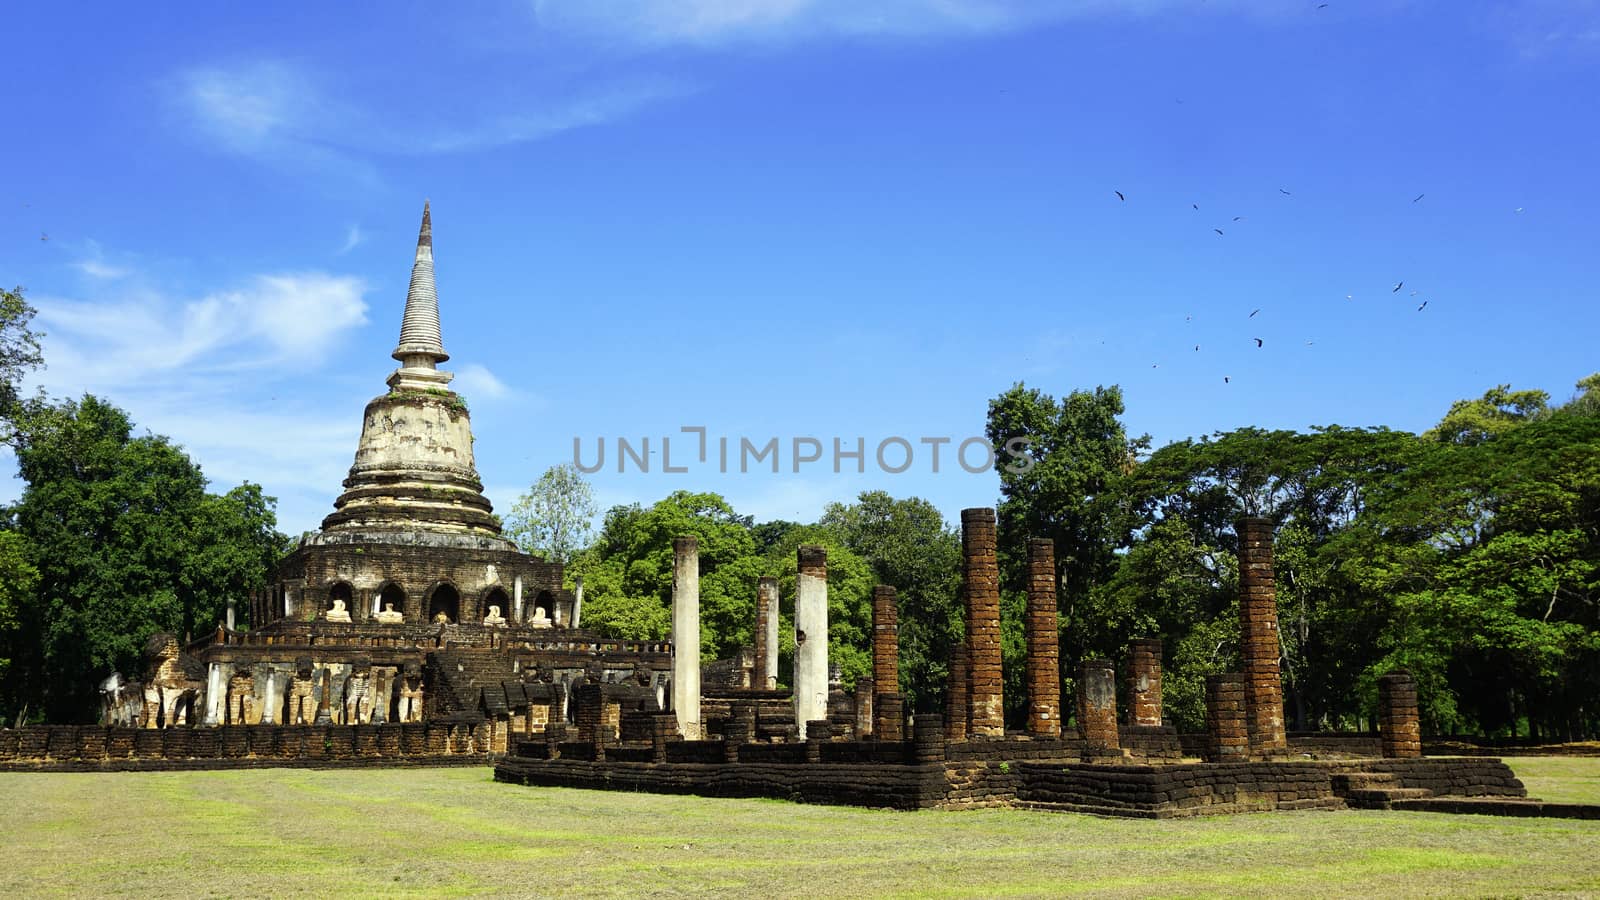 Historical Park Wat chang lom temple landscape with trees sukhot by polarbearstudio